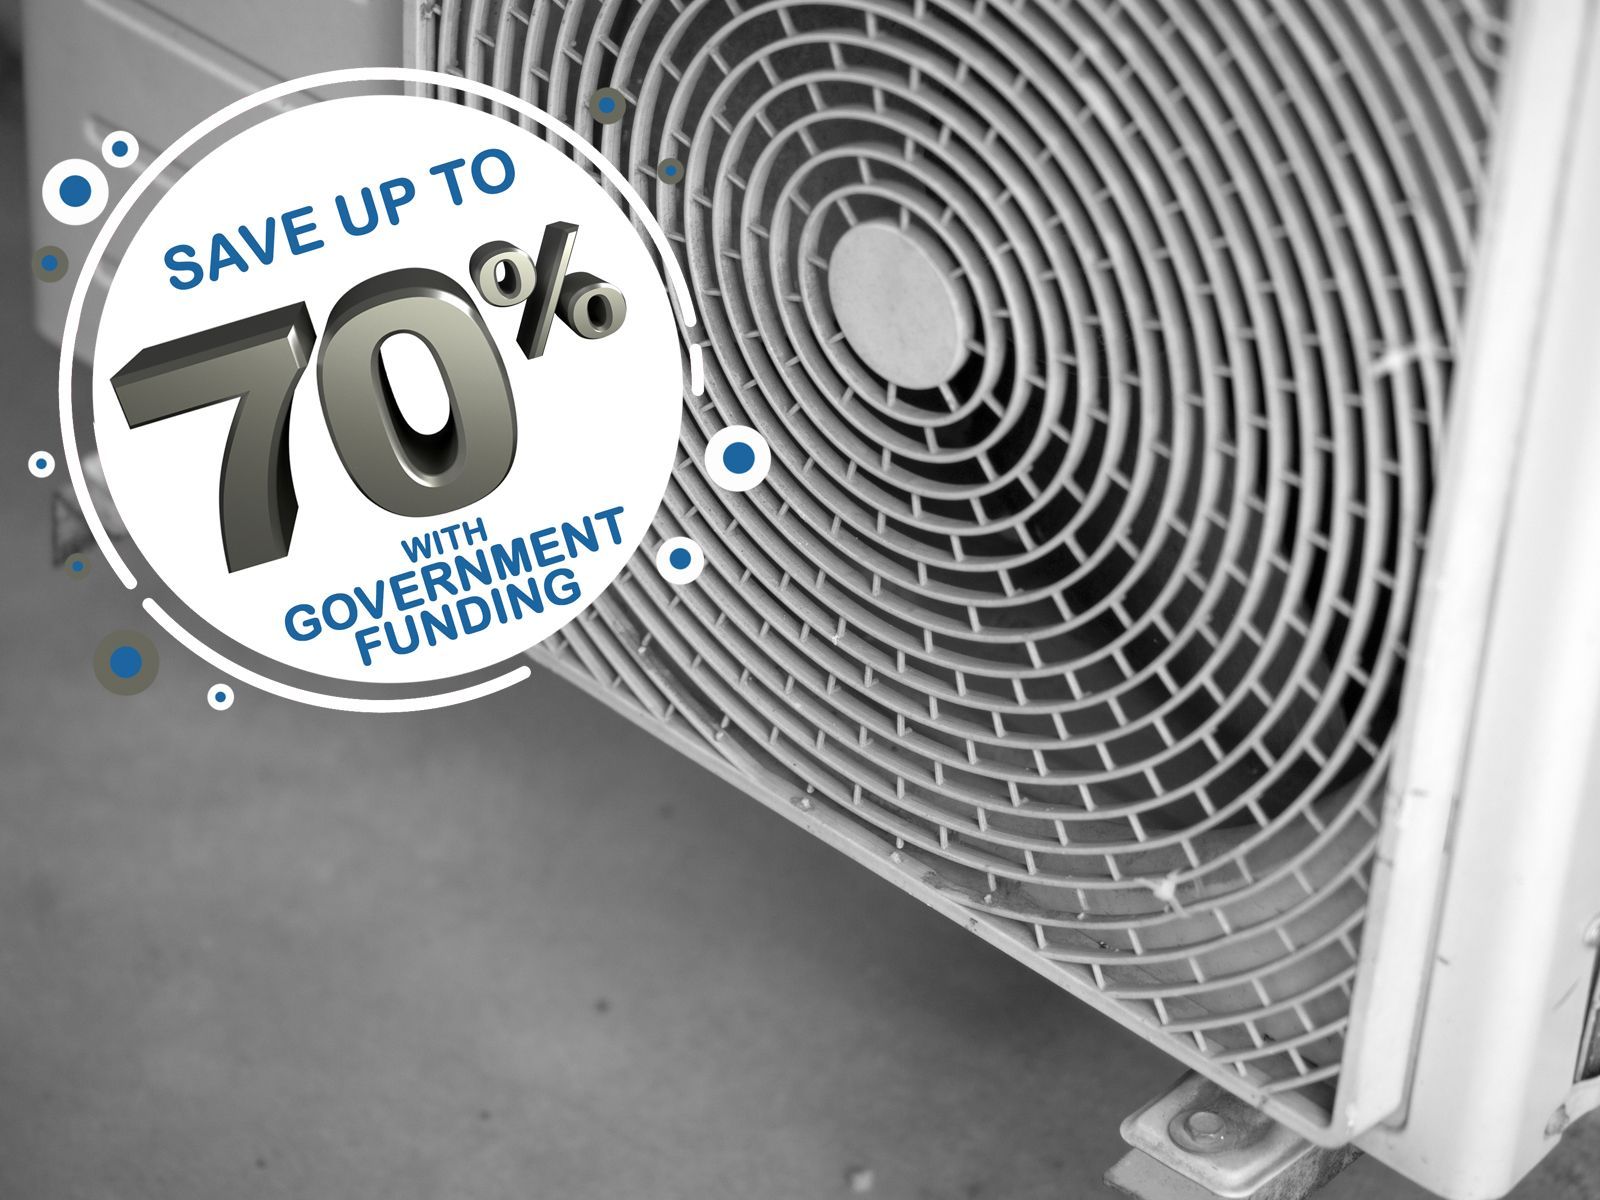 Air Source Heat Pump Course government funding available with up to 70% off